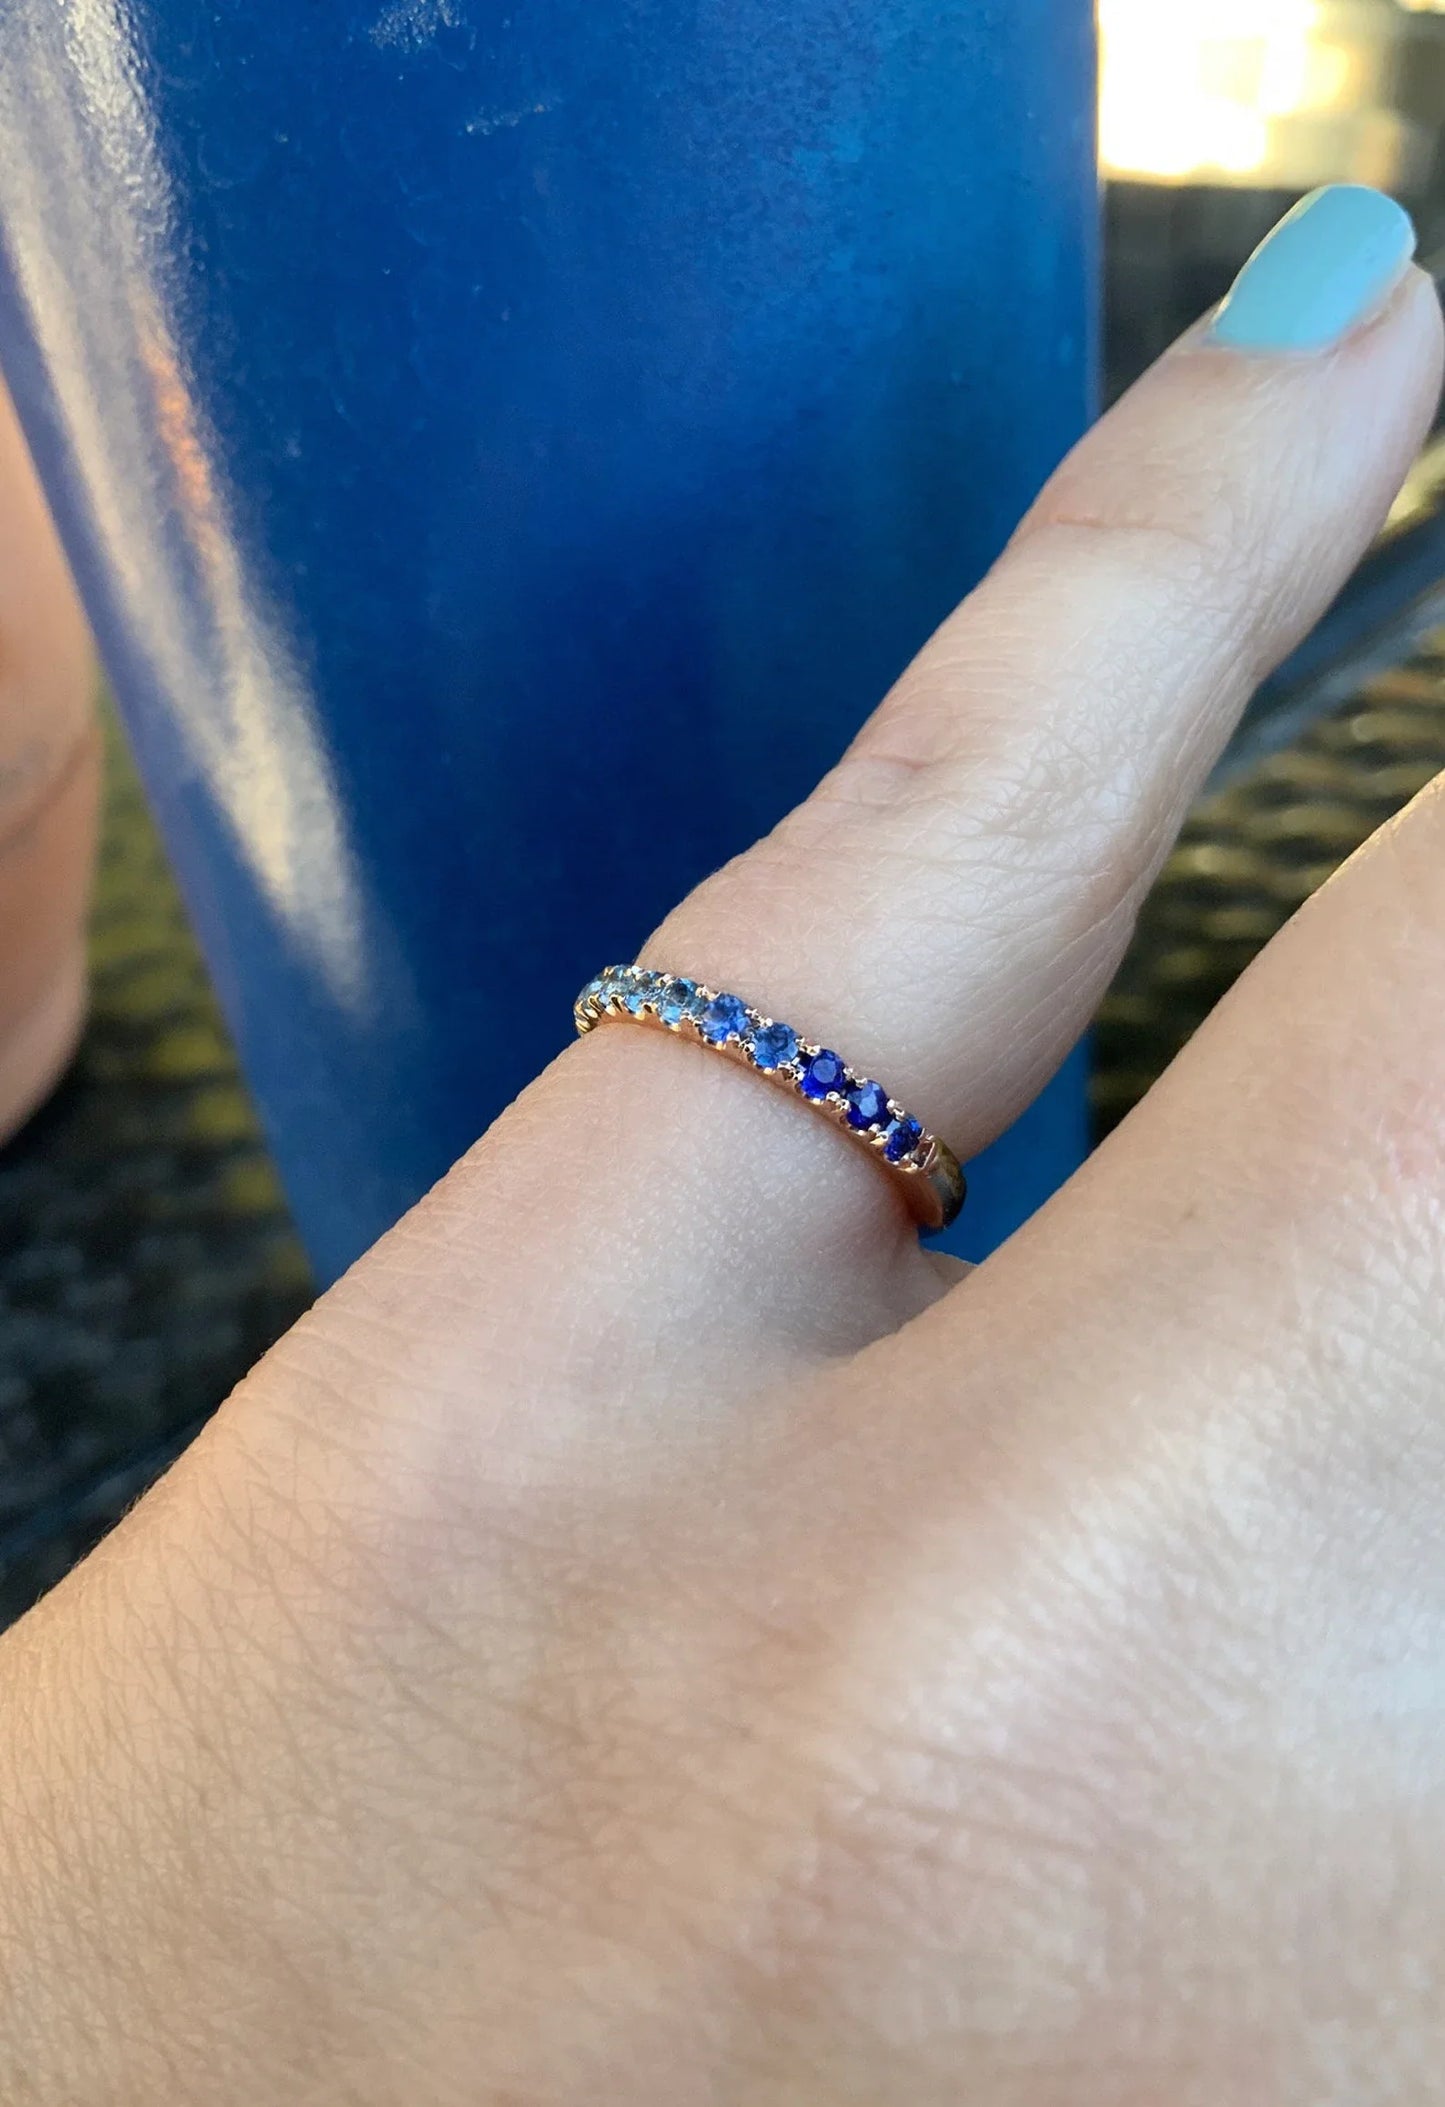 Reserved for Amber/ Diamond Wedding Band with Graduating Blue on Sides